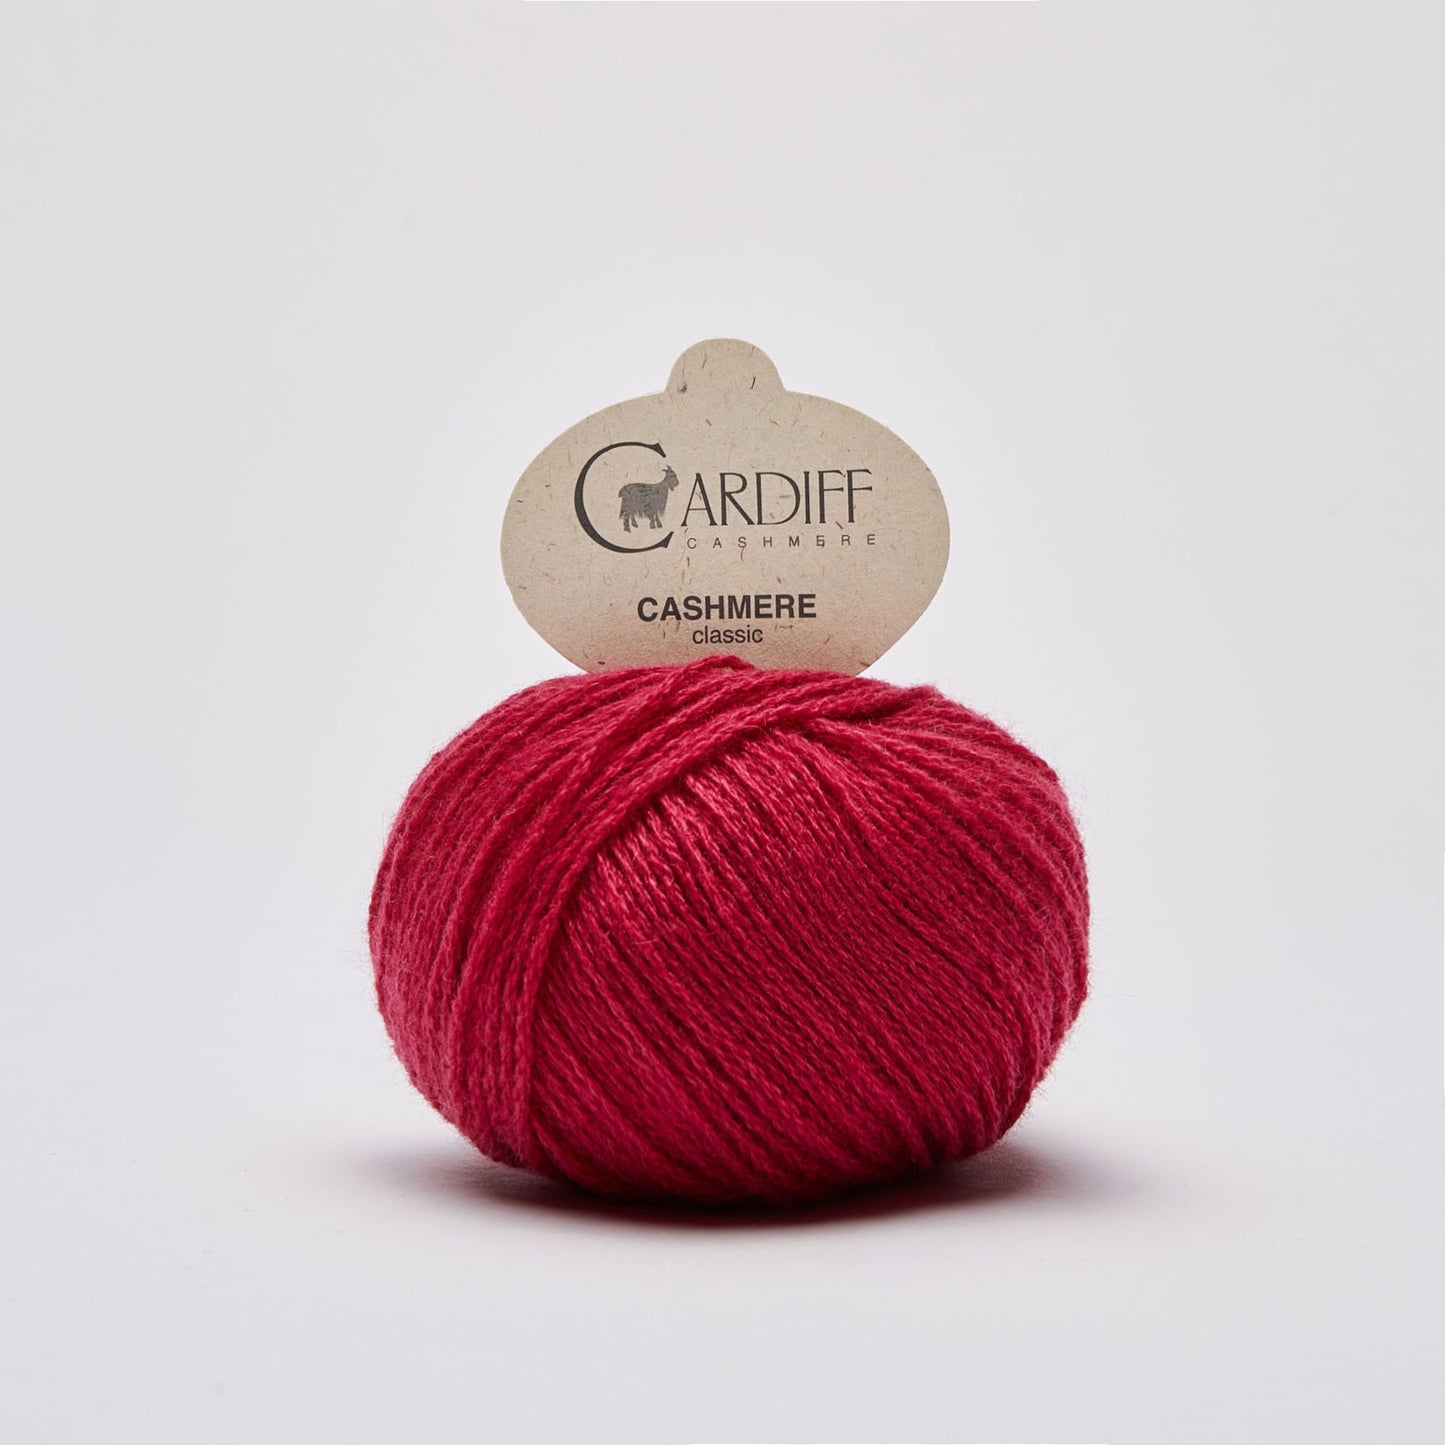 Cardiff CLASSIC gentle yarn, 578, MAGRITTE, comp: 100% Cashmere